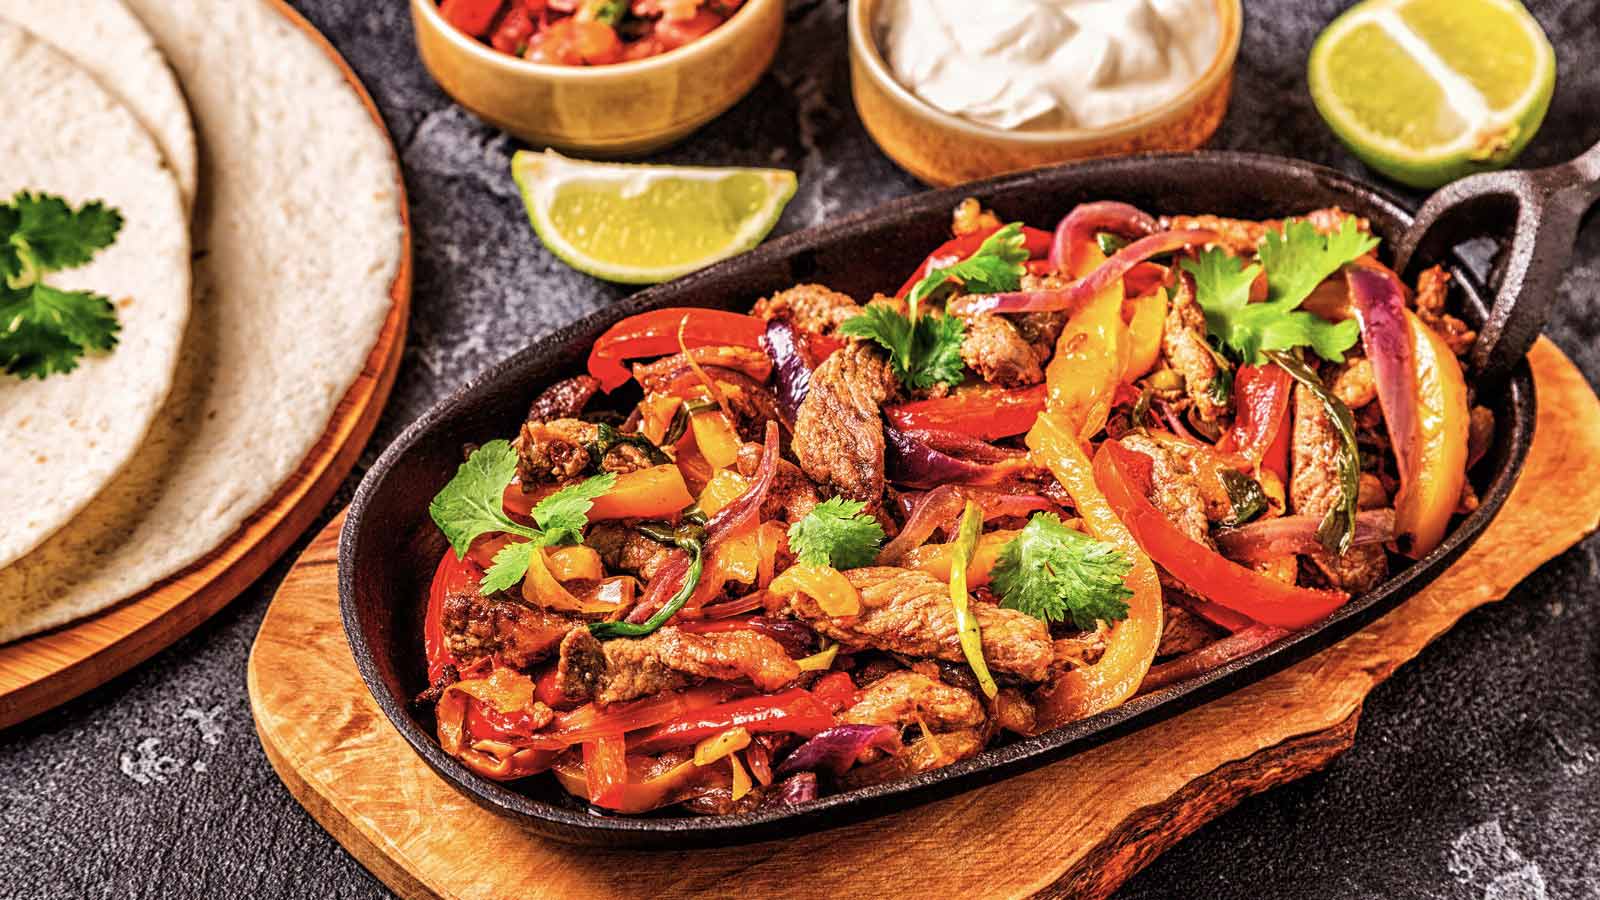 Pork fajitas with colored pepper and onions, served with tortillas, salsa and sour cream.